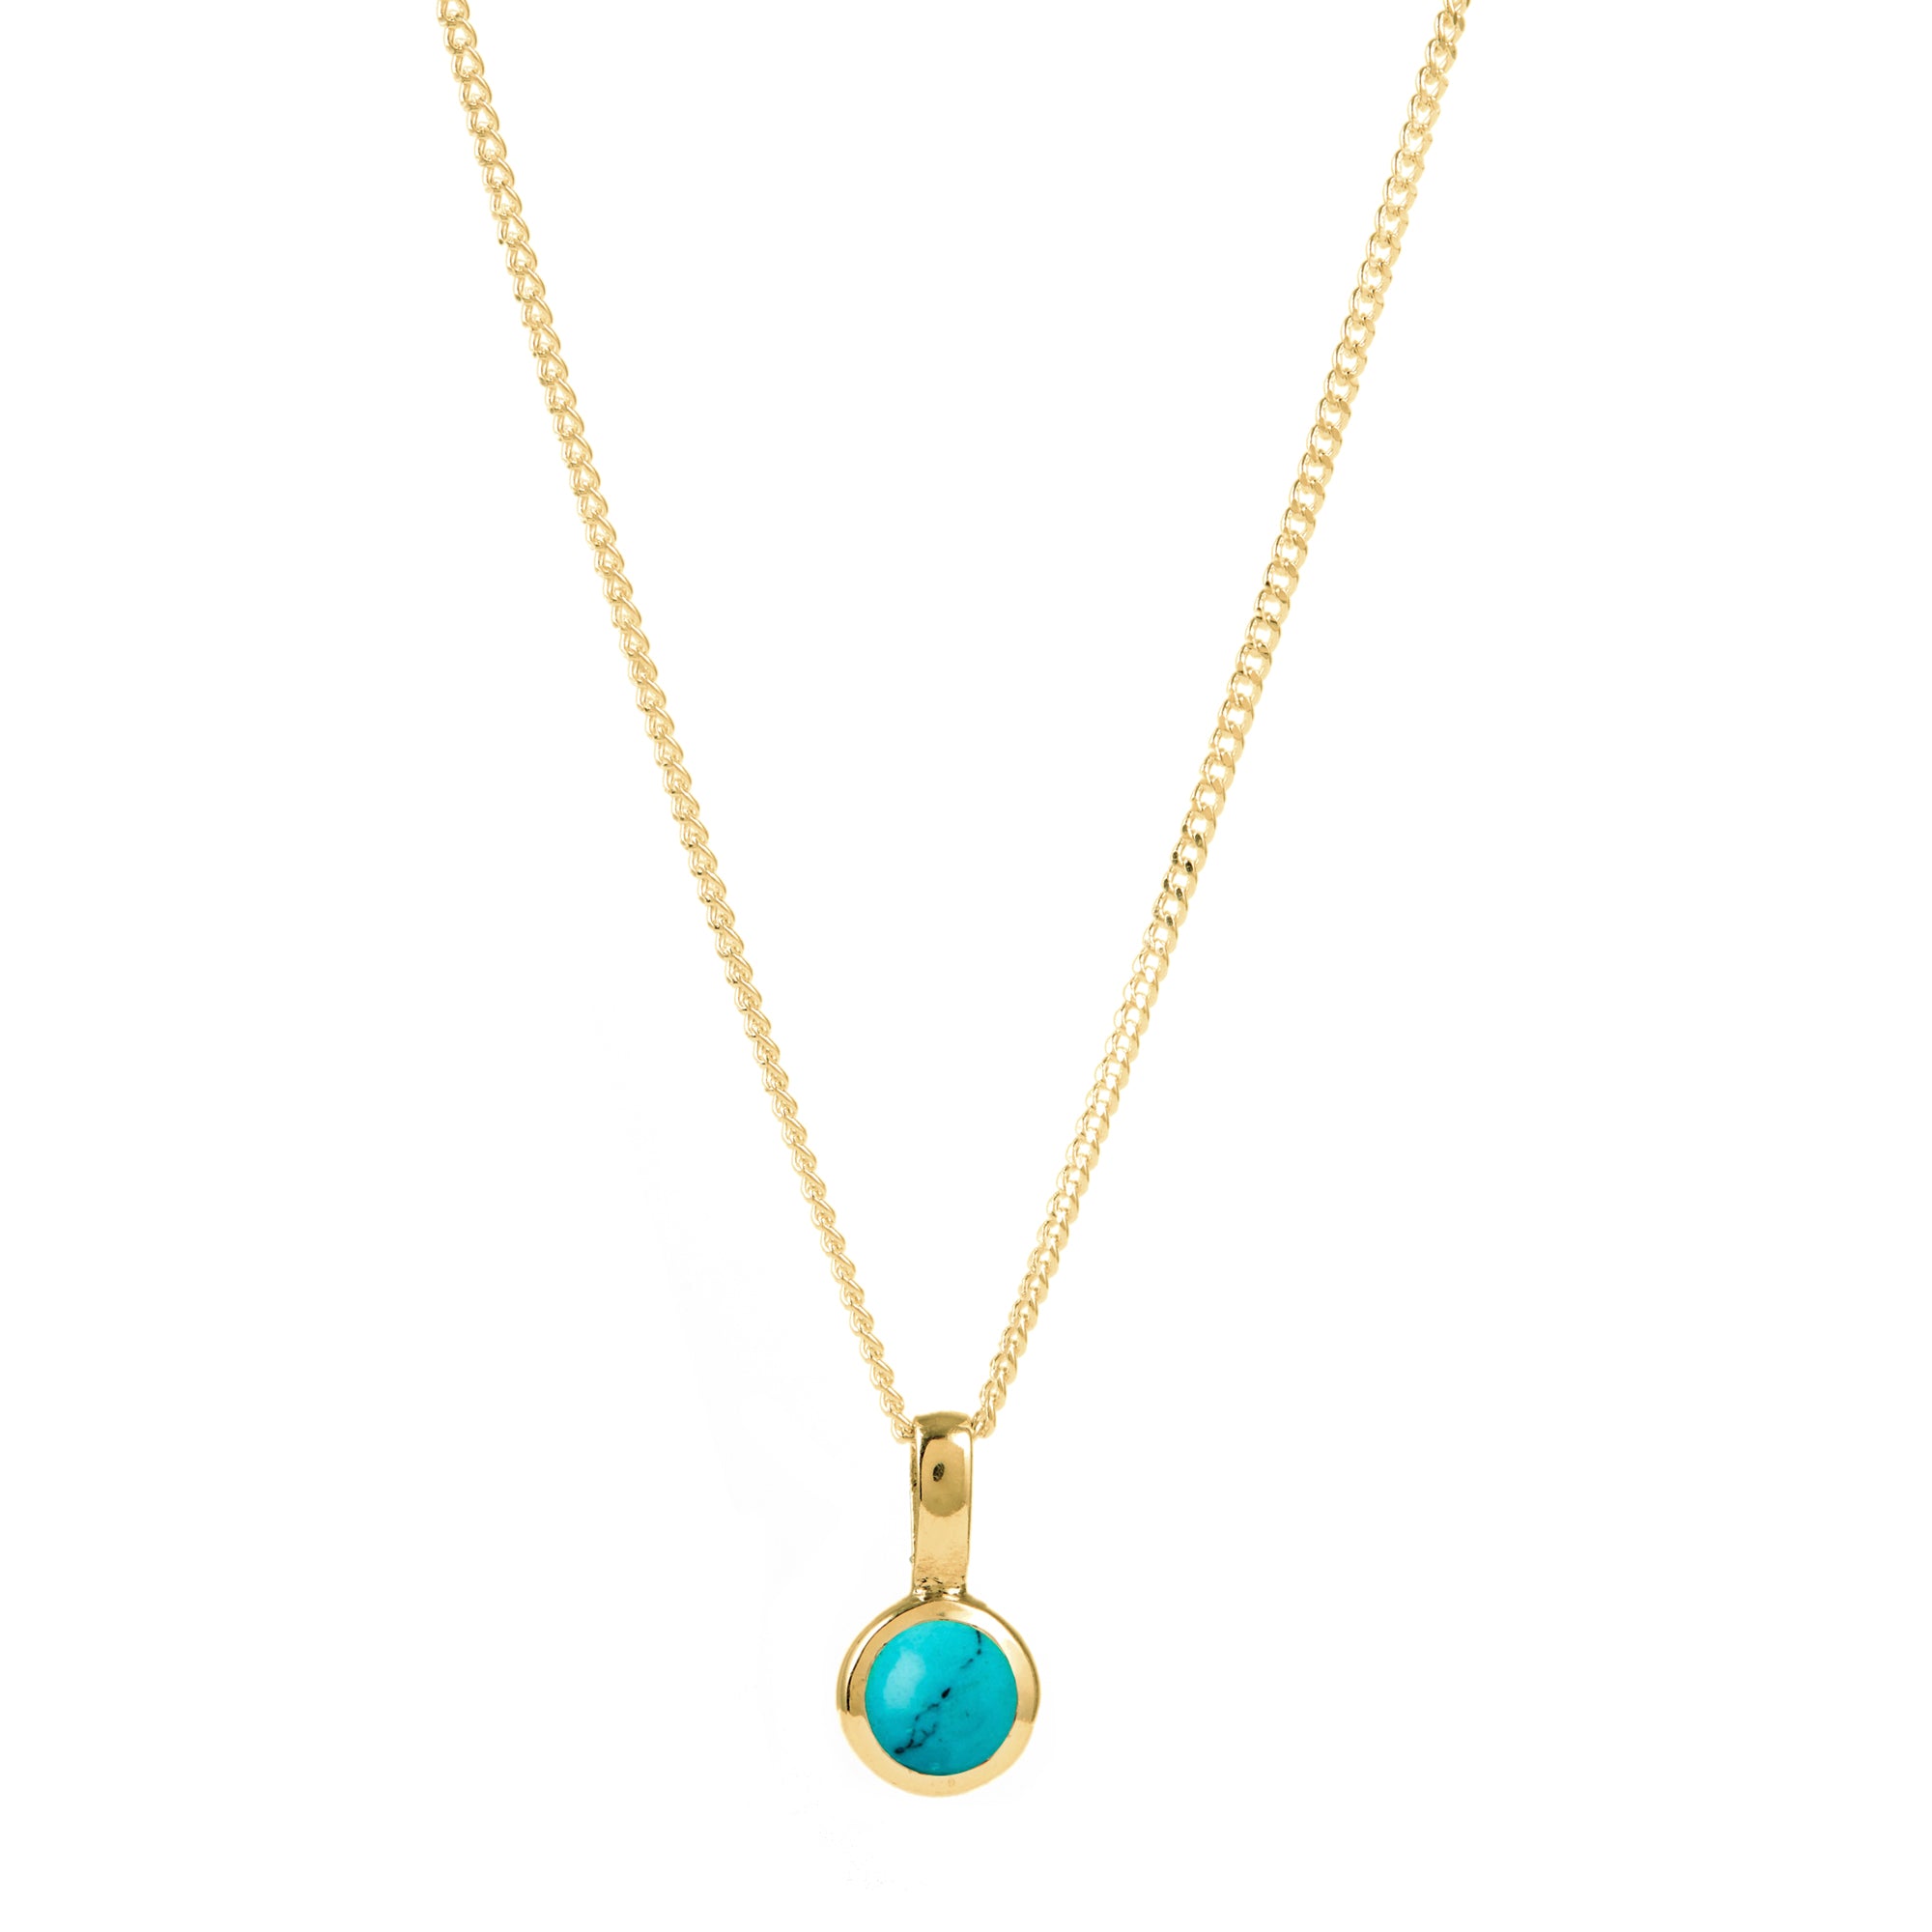 Turquoise December Birthstone Charm Necklace